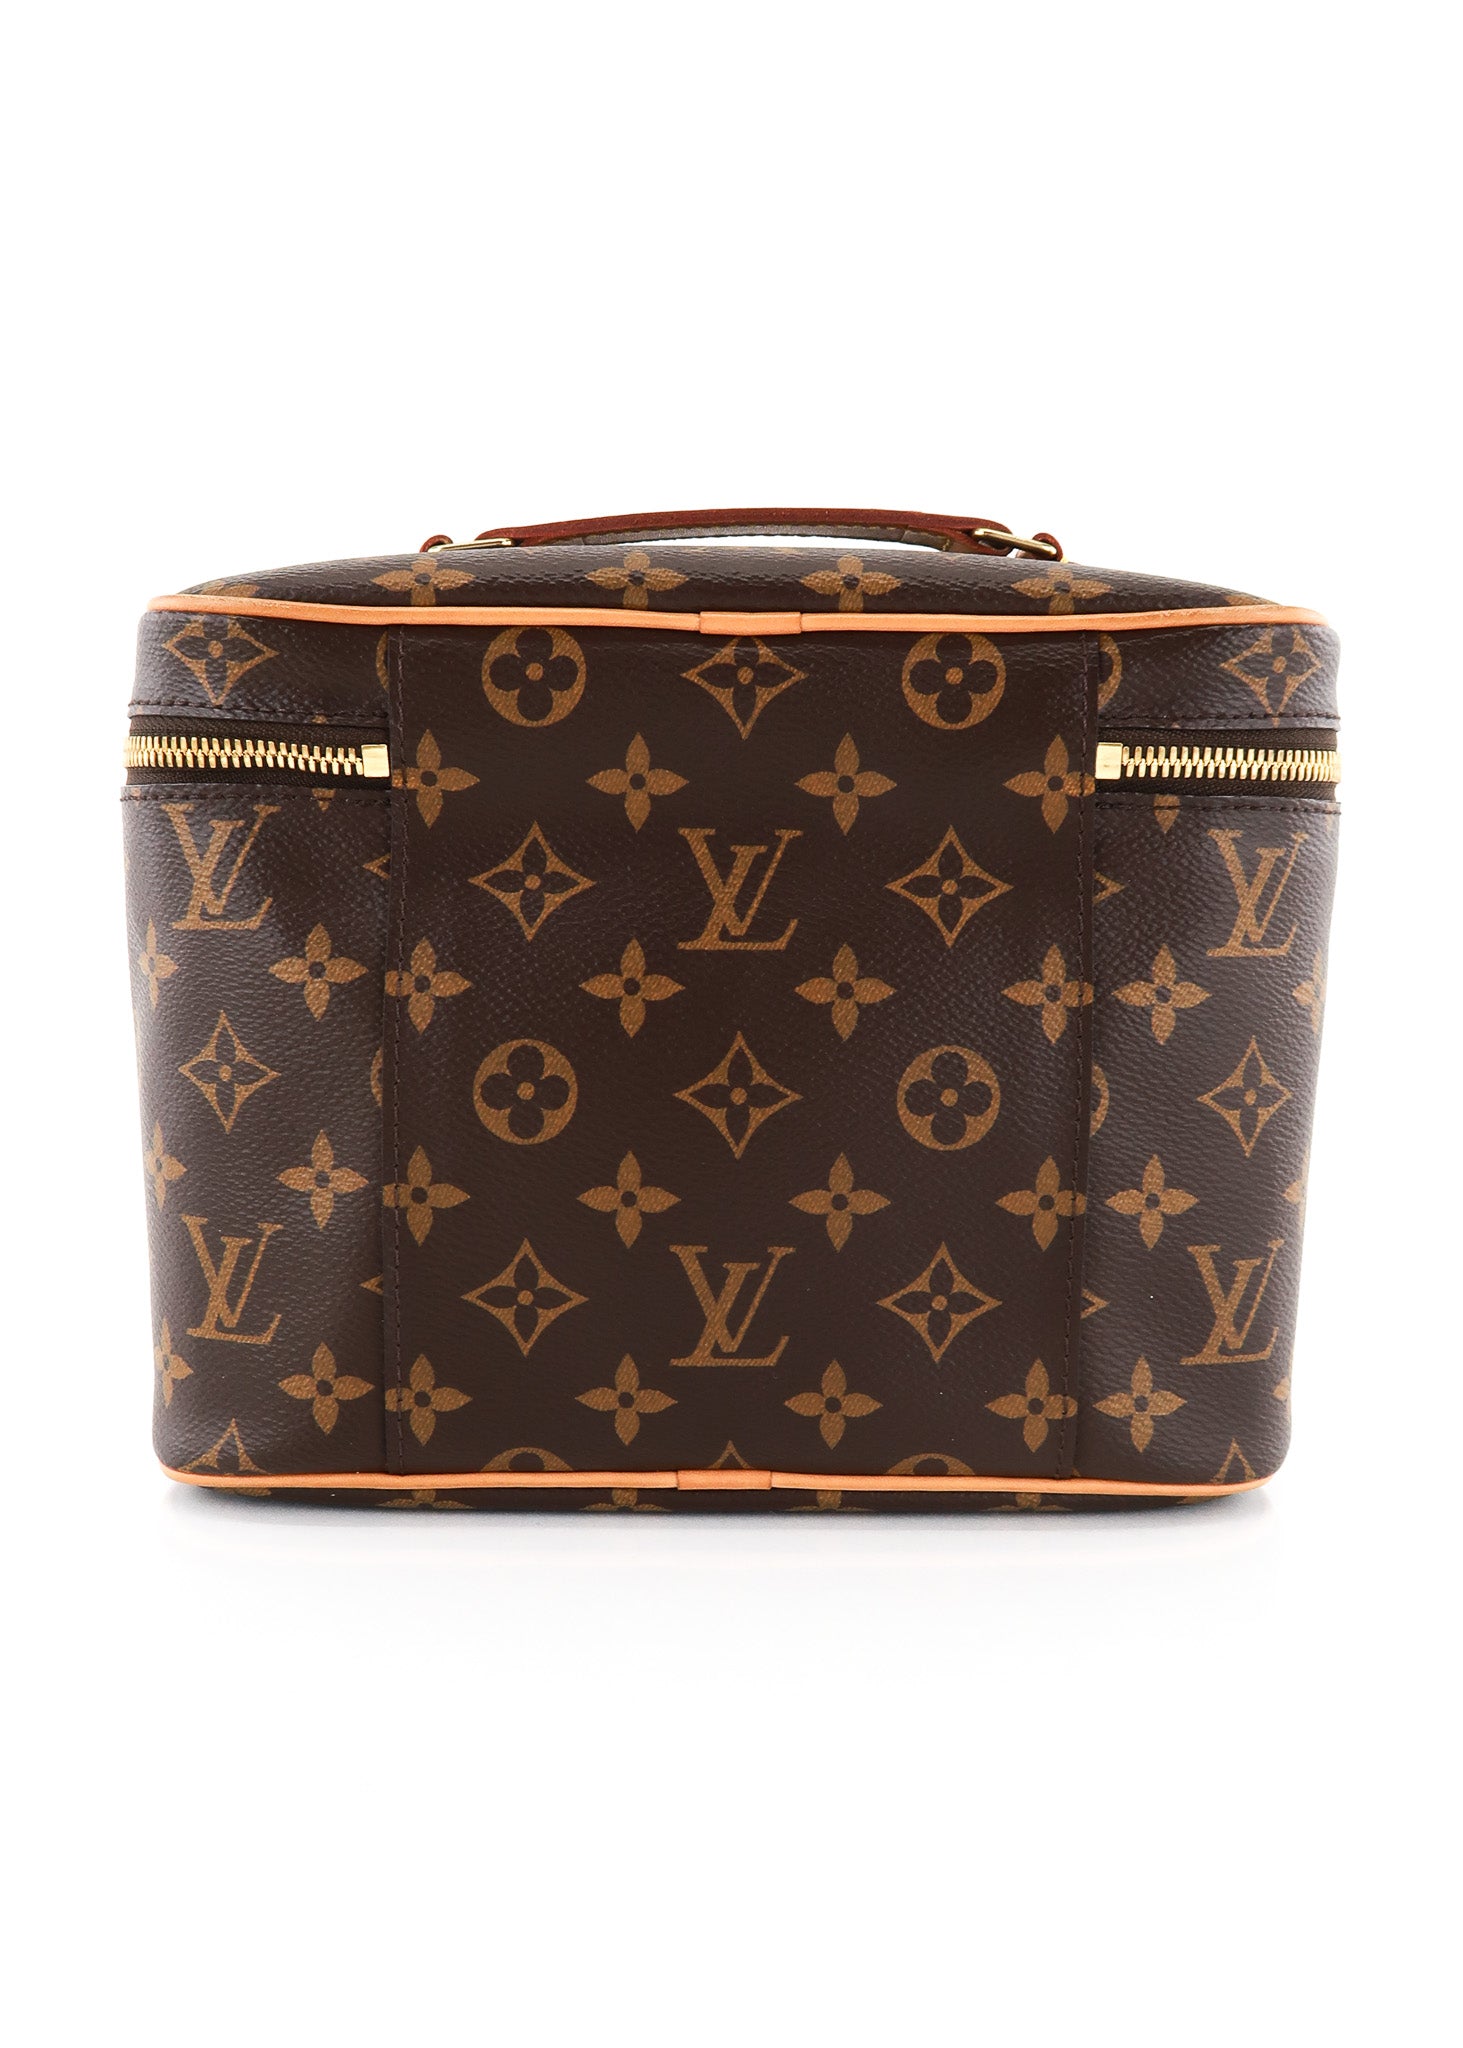 Louis Vuitton, Bags, Like New Nice Bb Louis Vuitton Vanity Like New Made  In Italy W Receipt